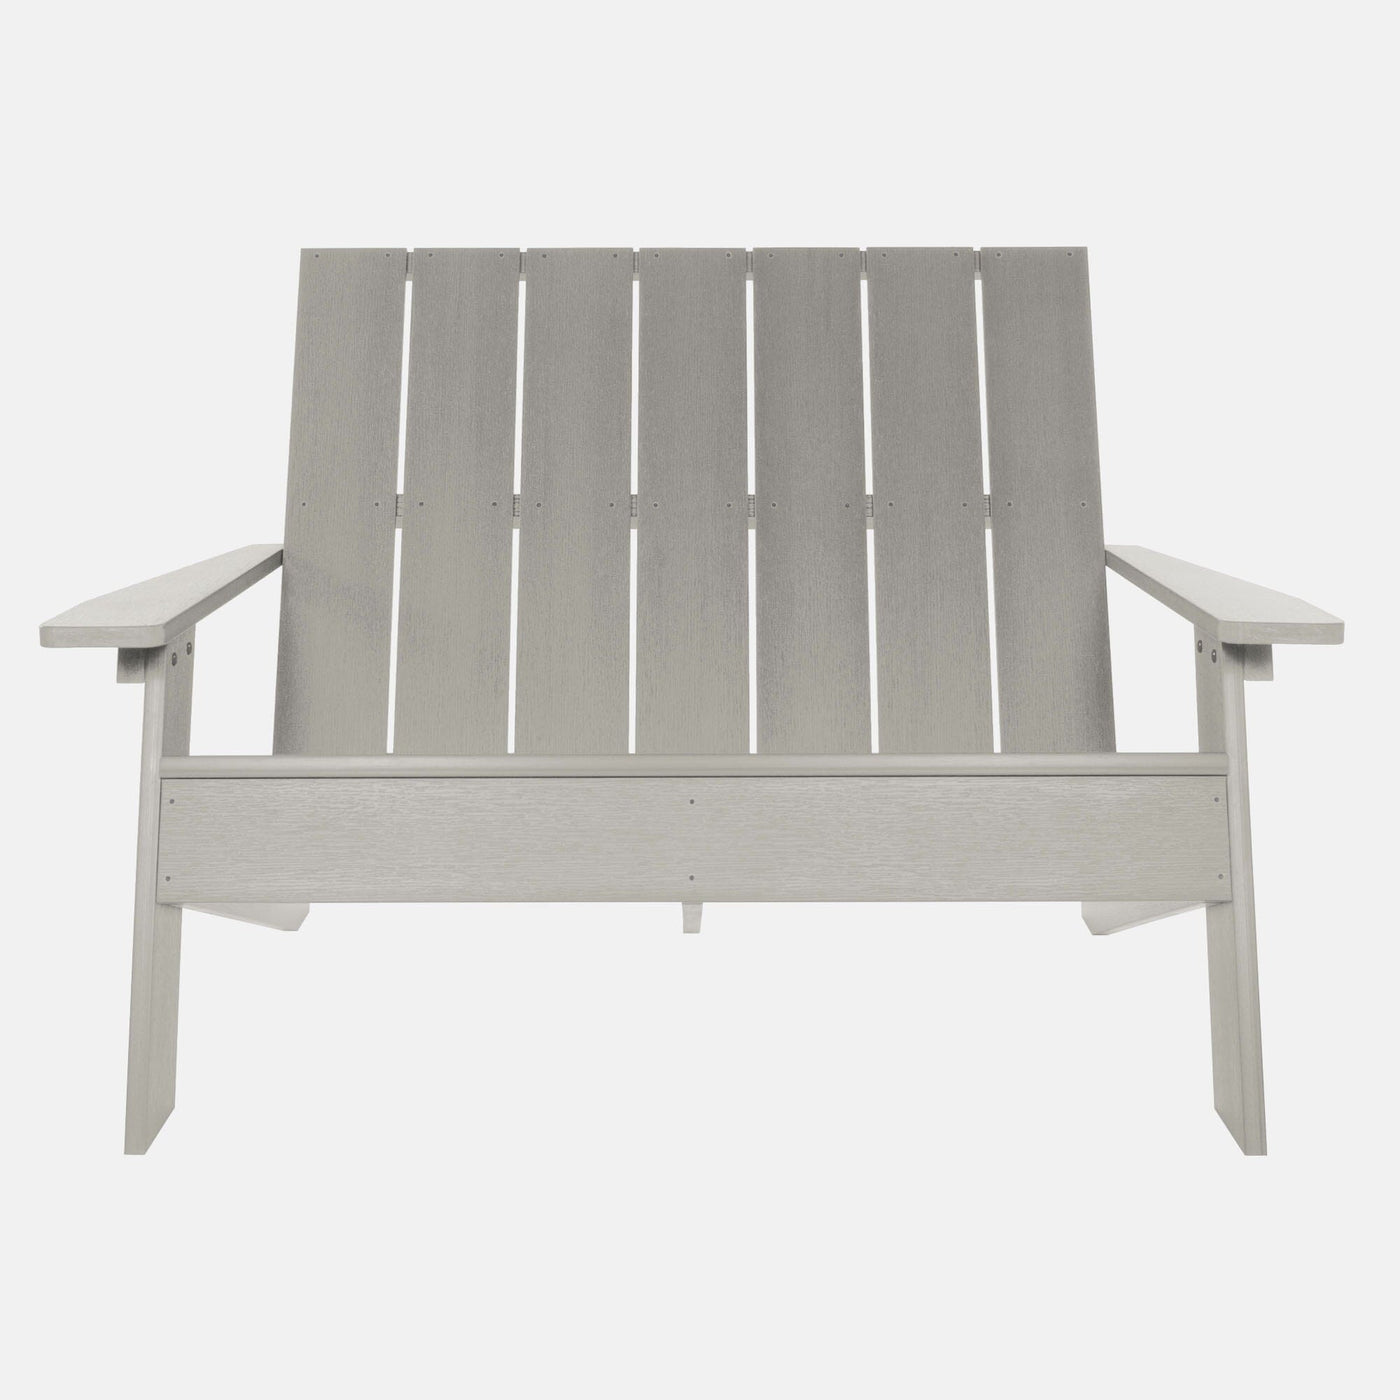 Front view of Italica Modern bench in Harbor Gray